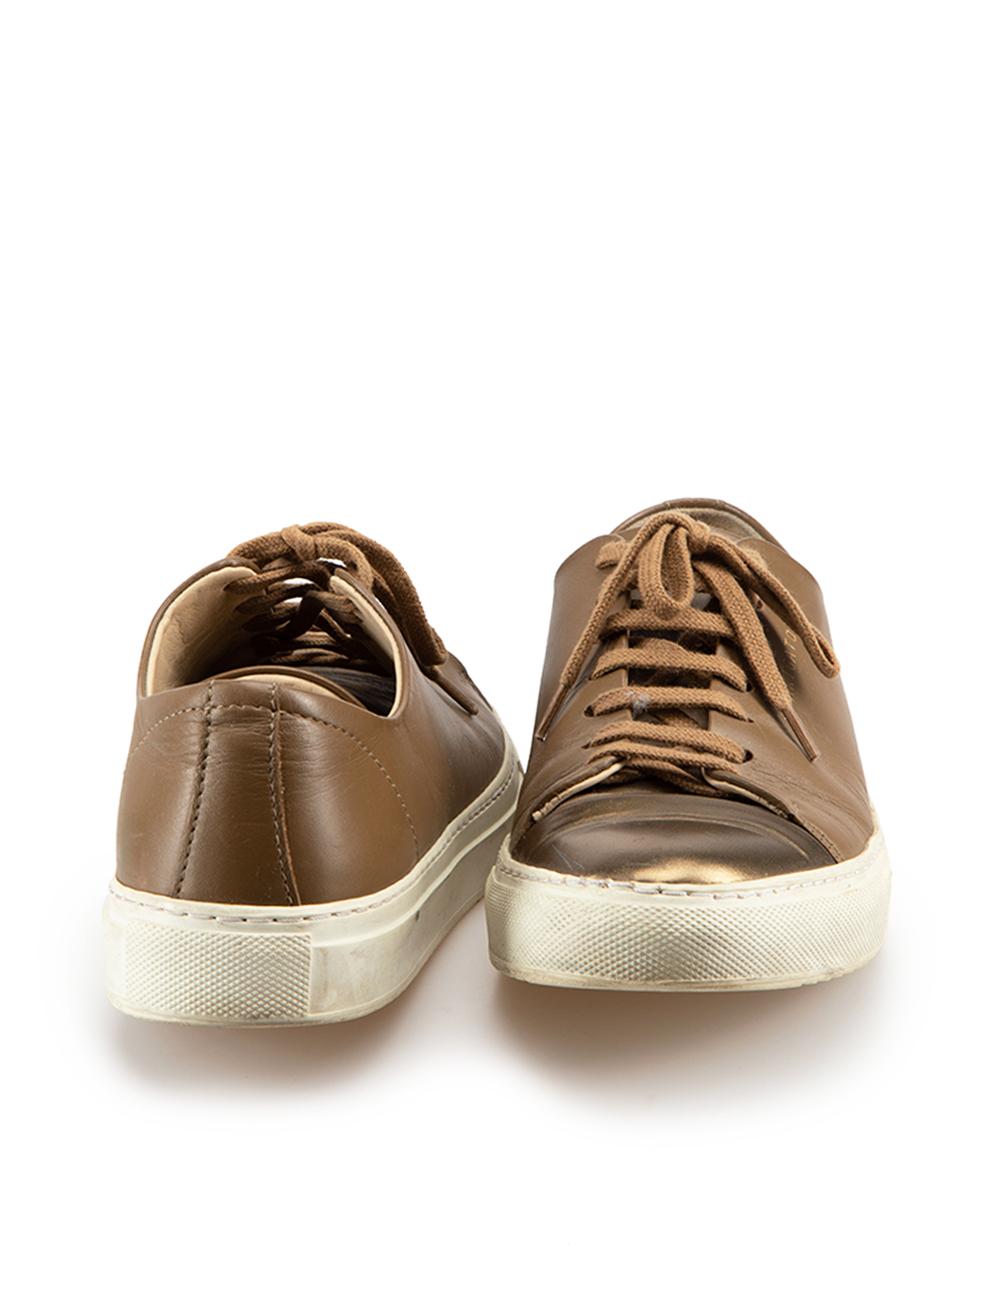 Axel Arigato Brown Leather Low Top Trainers Size IT 36 In Good Condition For Sale In London, GB